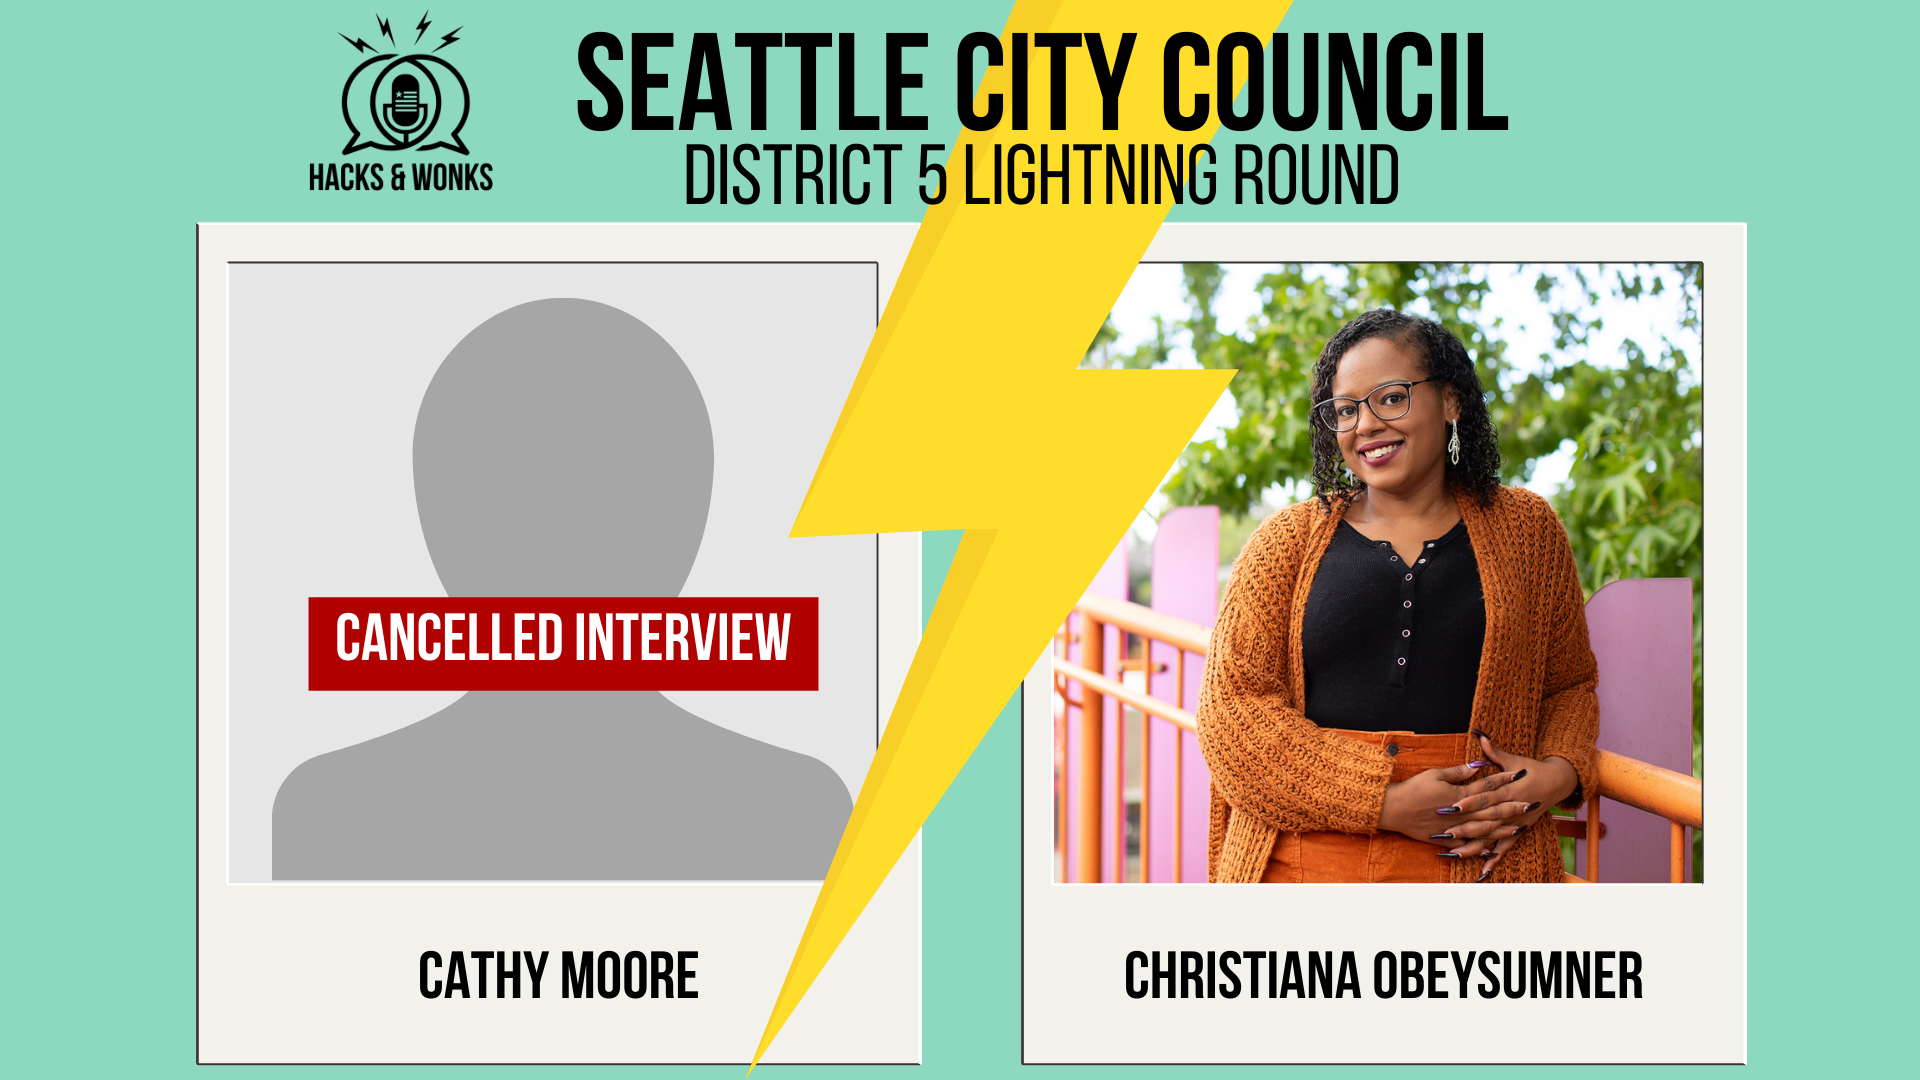 Lightning bolt divides District 5 candidates: Cathy Moore (placeholder image with “Cancelled Interview” across it) and ChrisTiana ObeySumner (campaign photo)